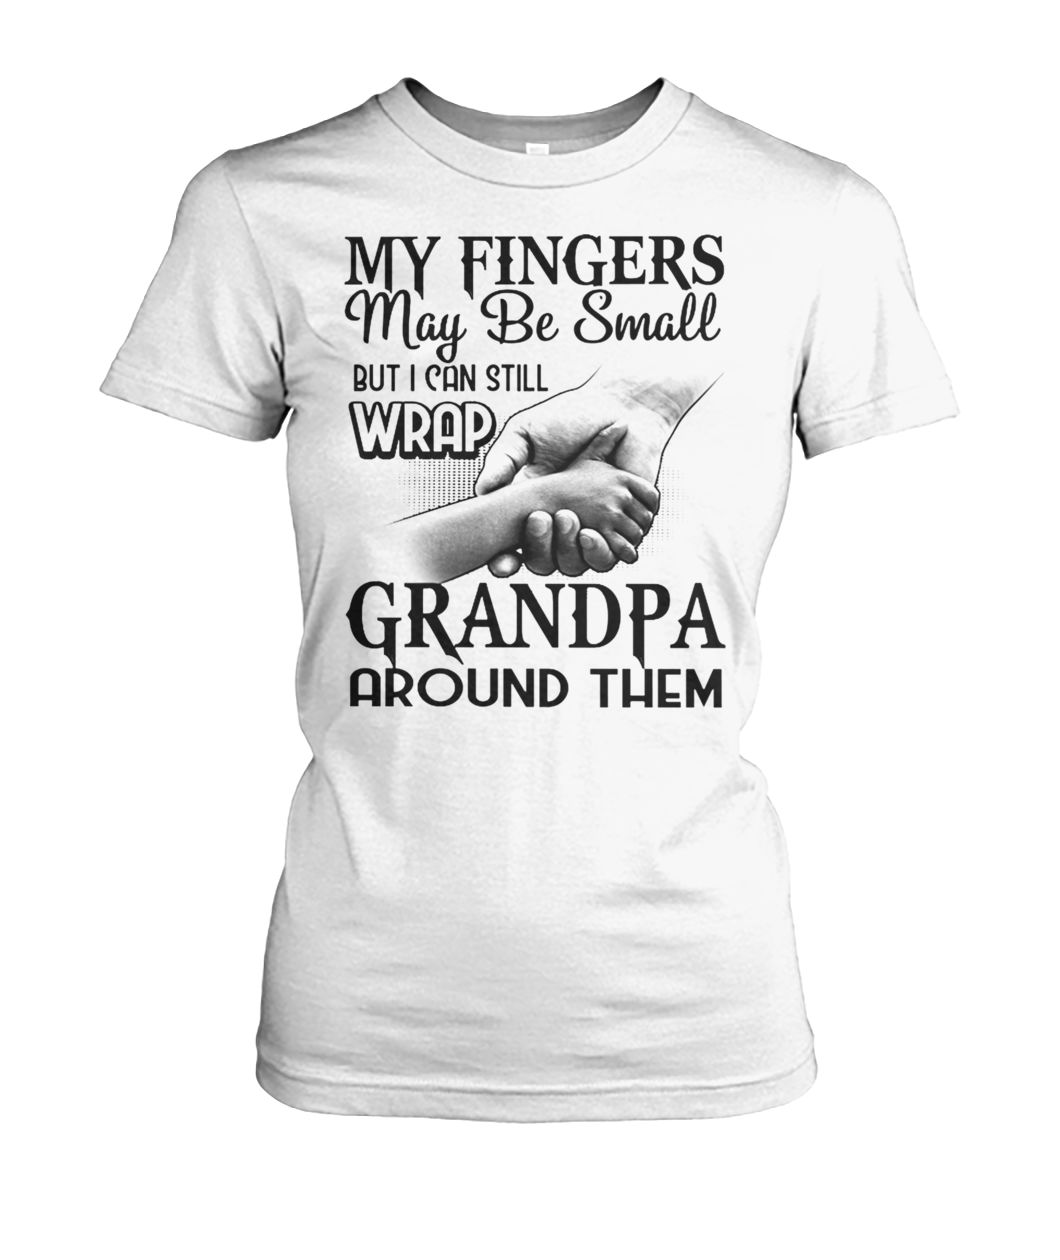 My fingers may be small but I can still wrap grandpa around them women's crew tee